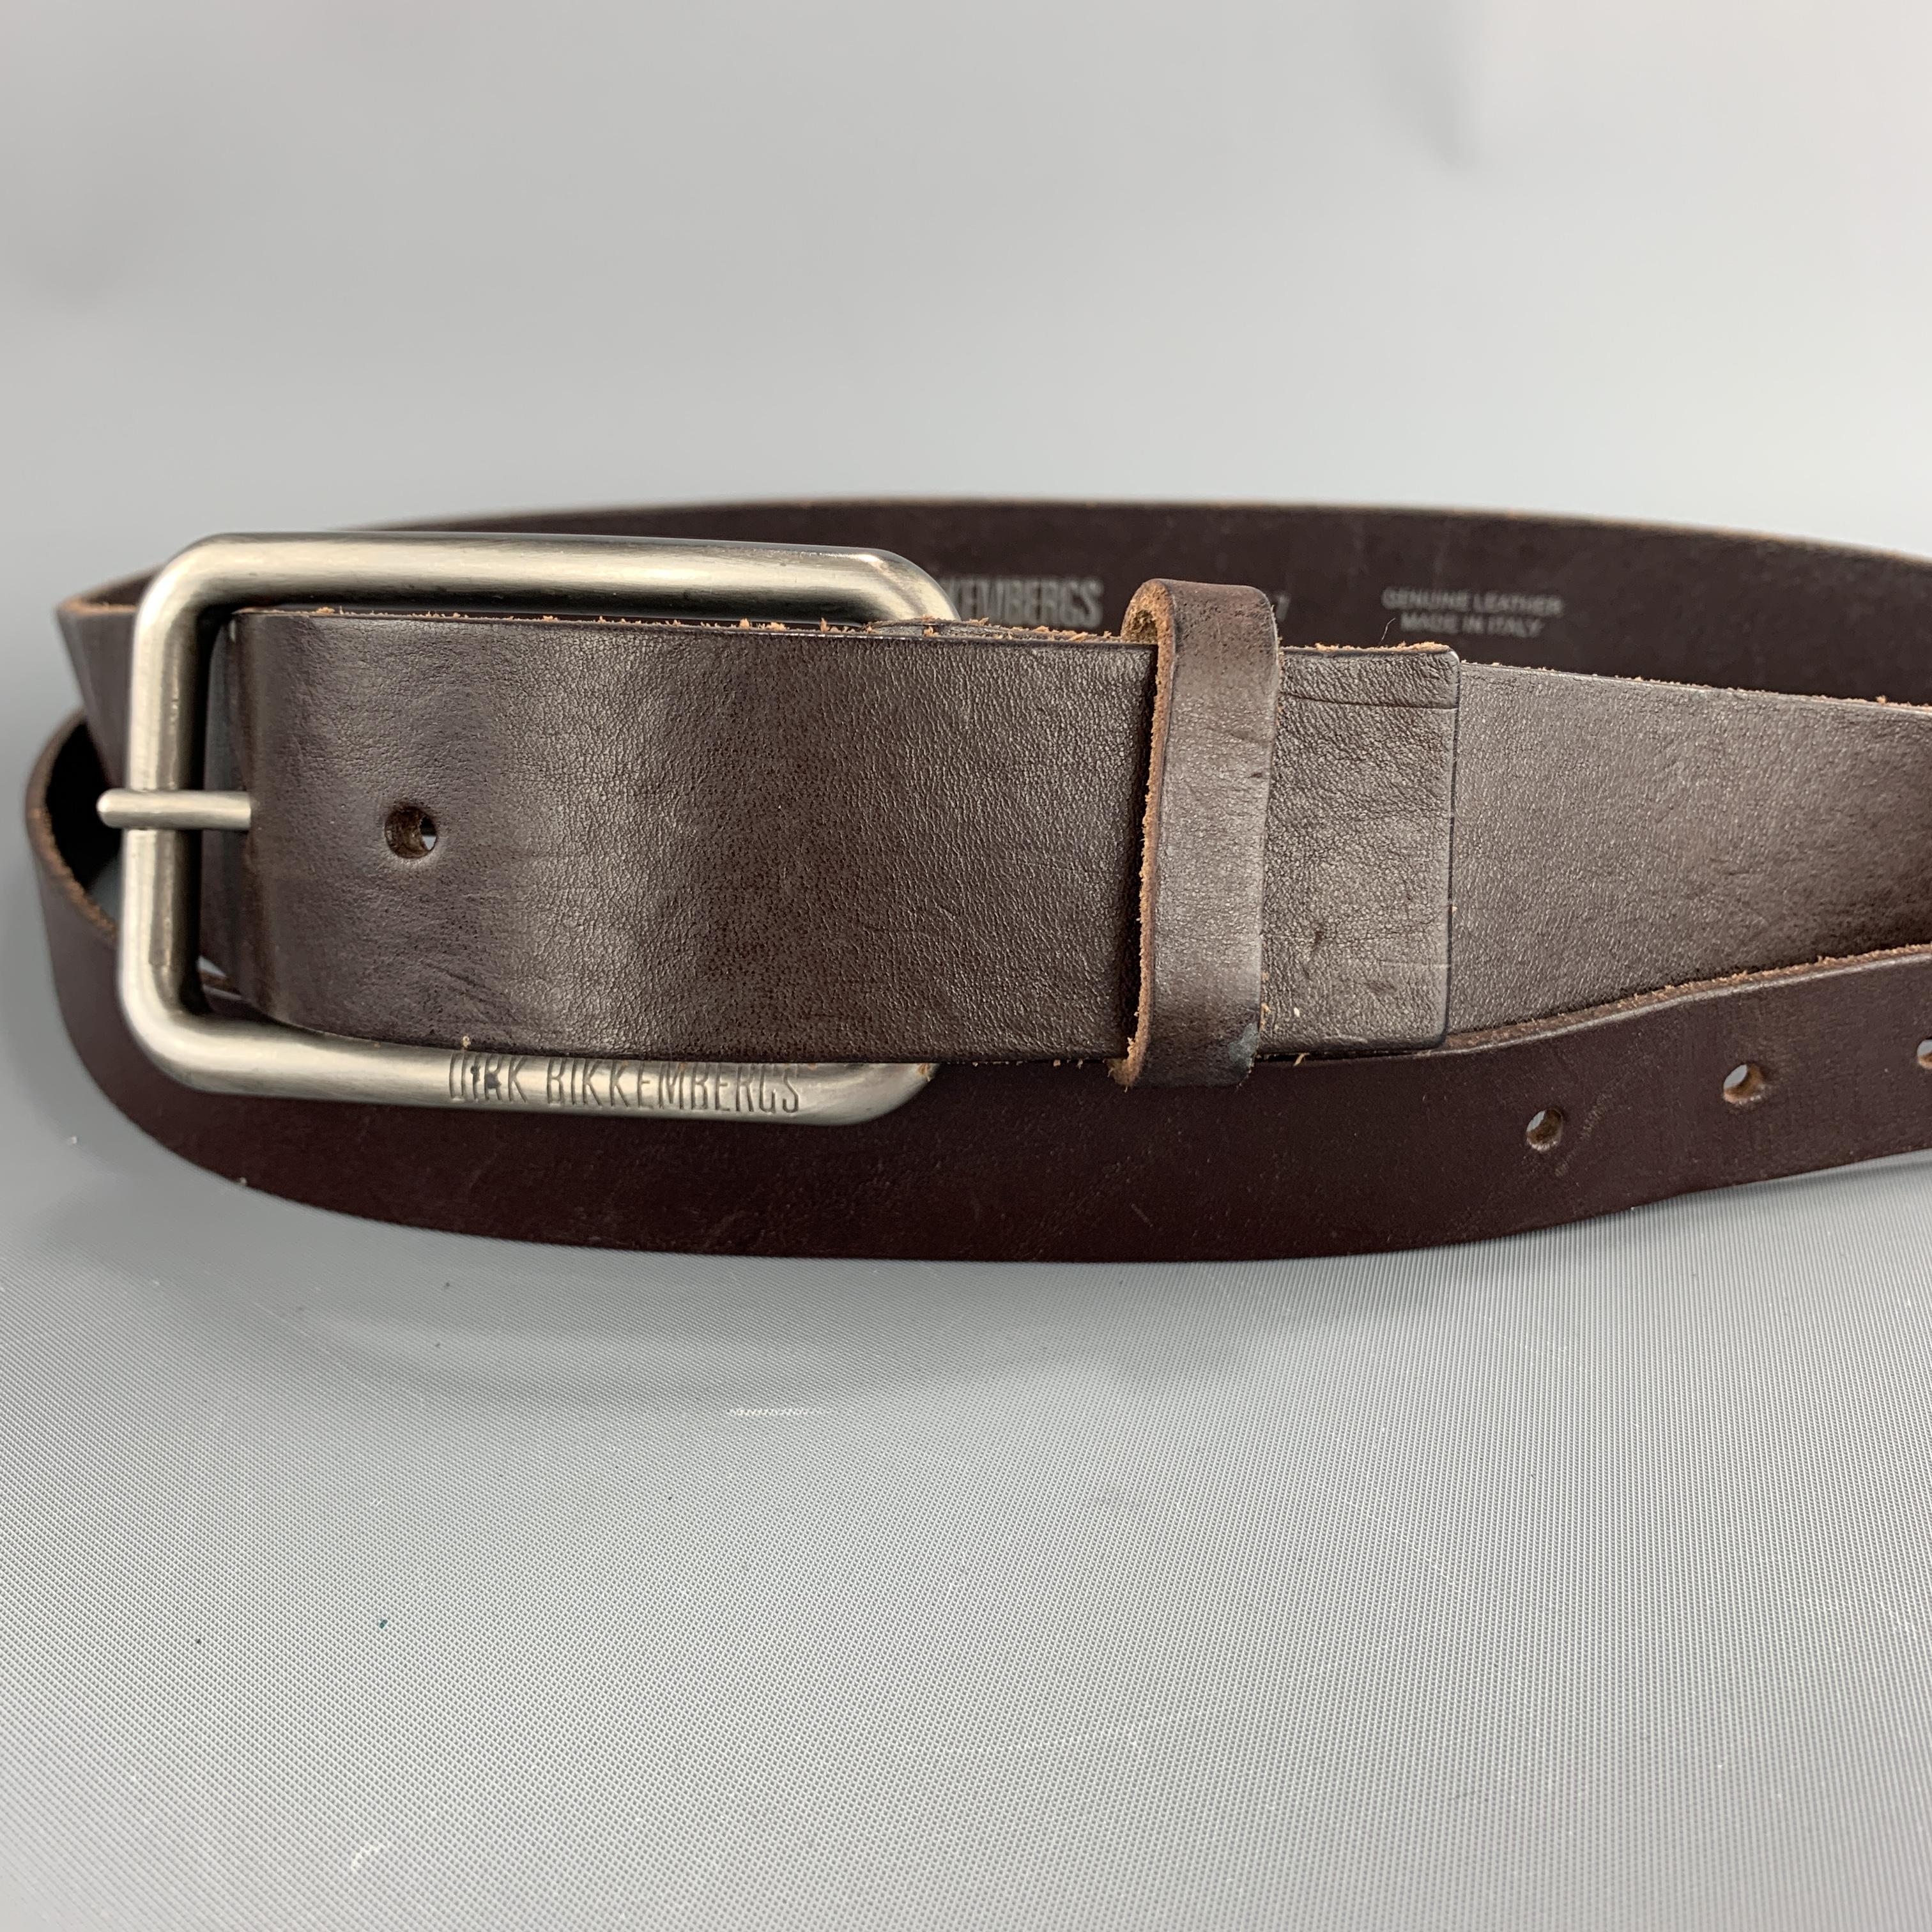 DIRK BIKKEMBERGS belt comes in deep brown leather with an oversized silver tone buckle closure and thin layered overlay belt. Made in Italy.

Excellent Pre-Owned Condition.
Marked: IT 44

Length: 38.5 in.
Width: 1.5 in.
Fits: 30.5 - 34.5 in.